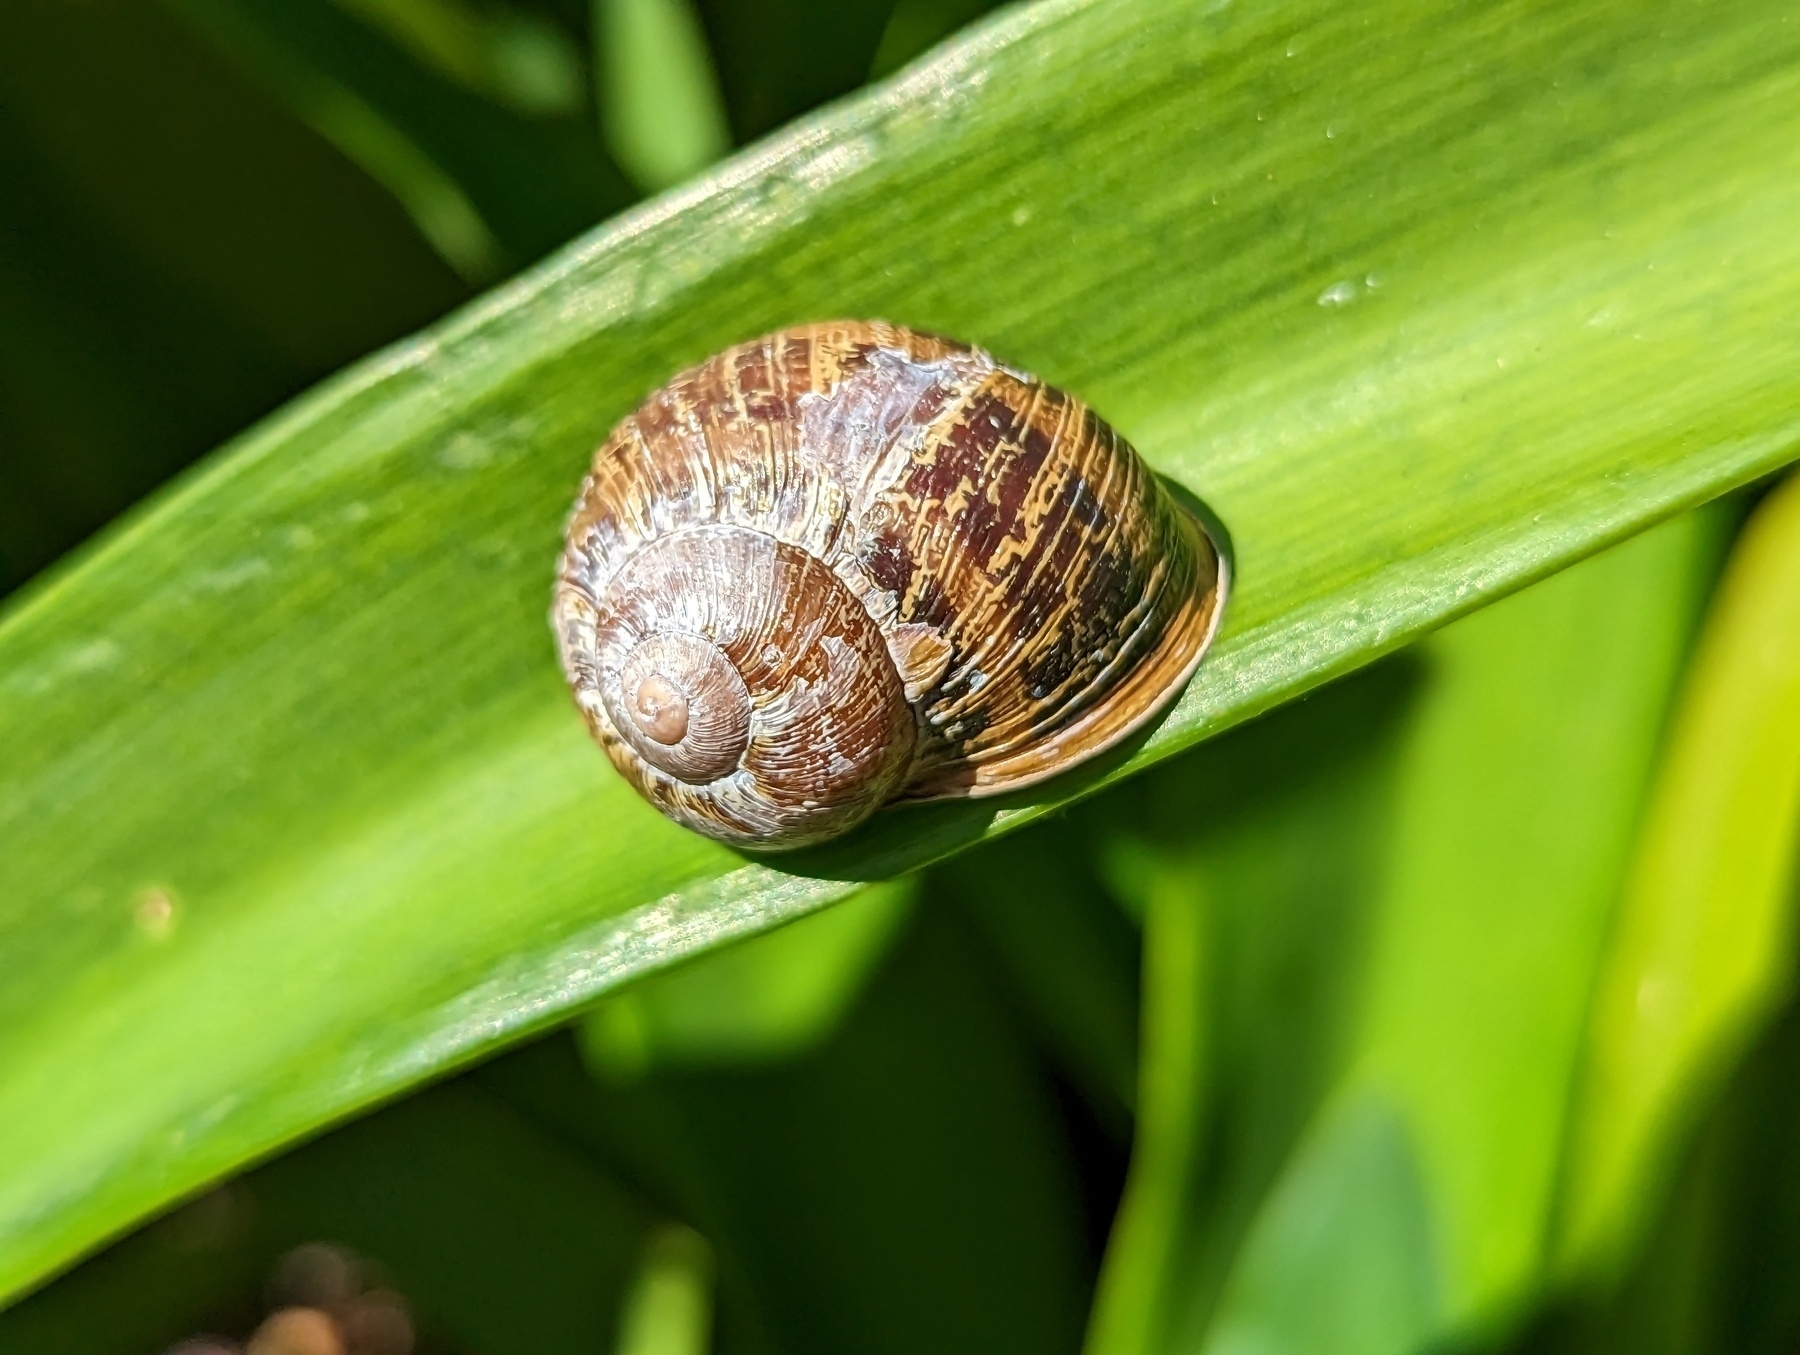 A snail's striped brown shell sits on a brilliant green leaf of a plant under sunlight Saturday, April 16th, 2023 at Cutting Boulevard and Elm Street in El Cerrito, California